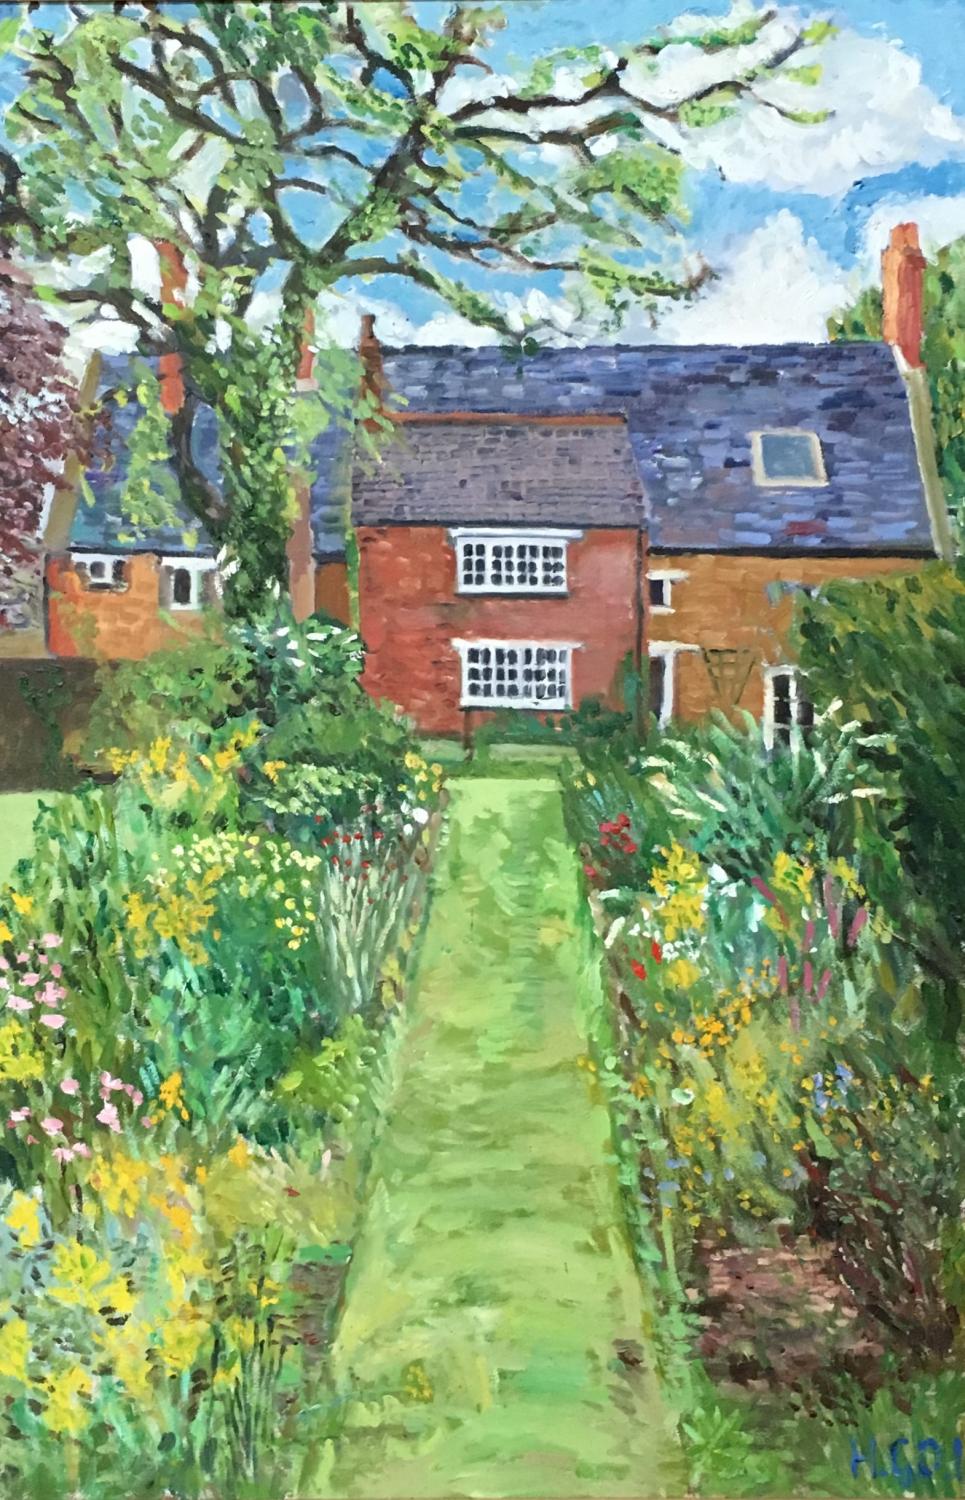 Cottage garden Fawsley, Northamptonshire by N